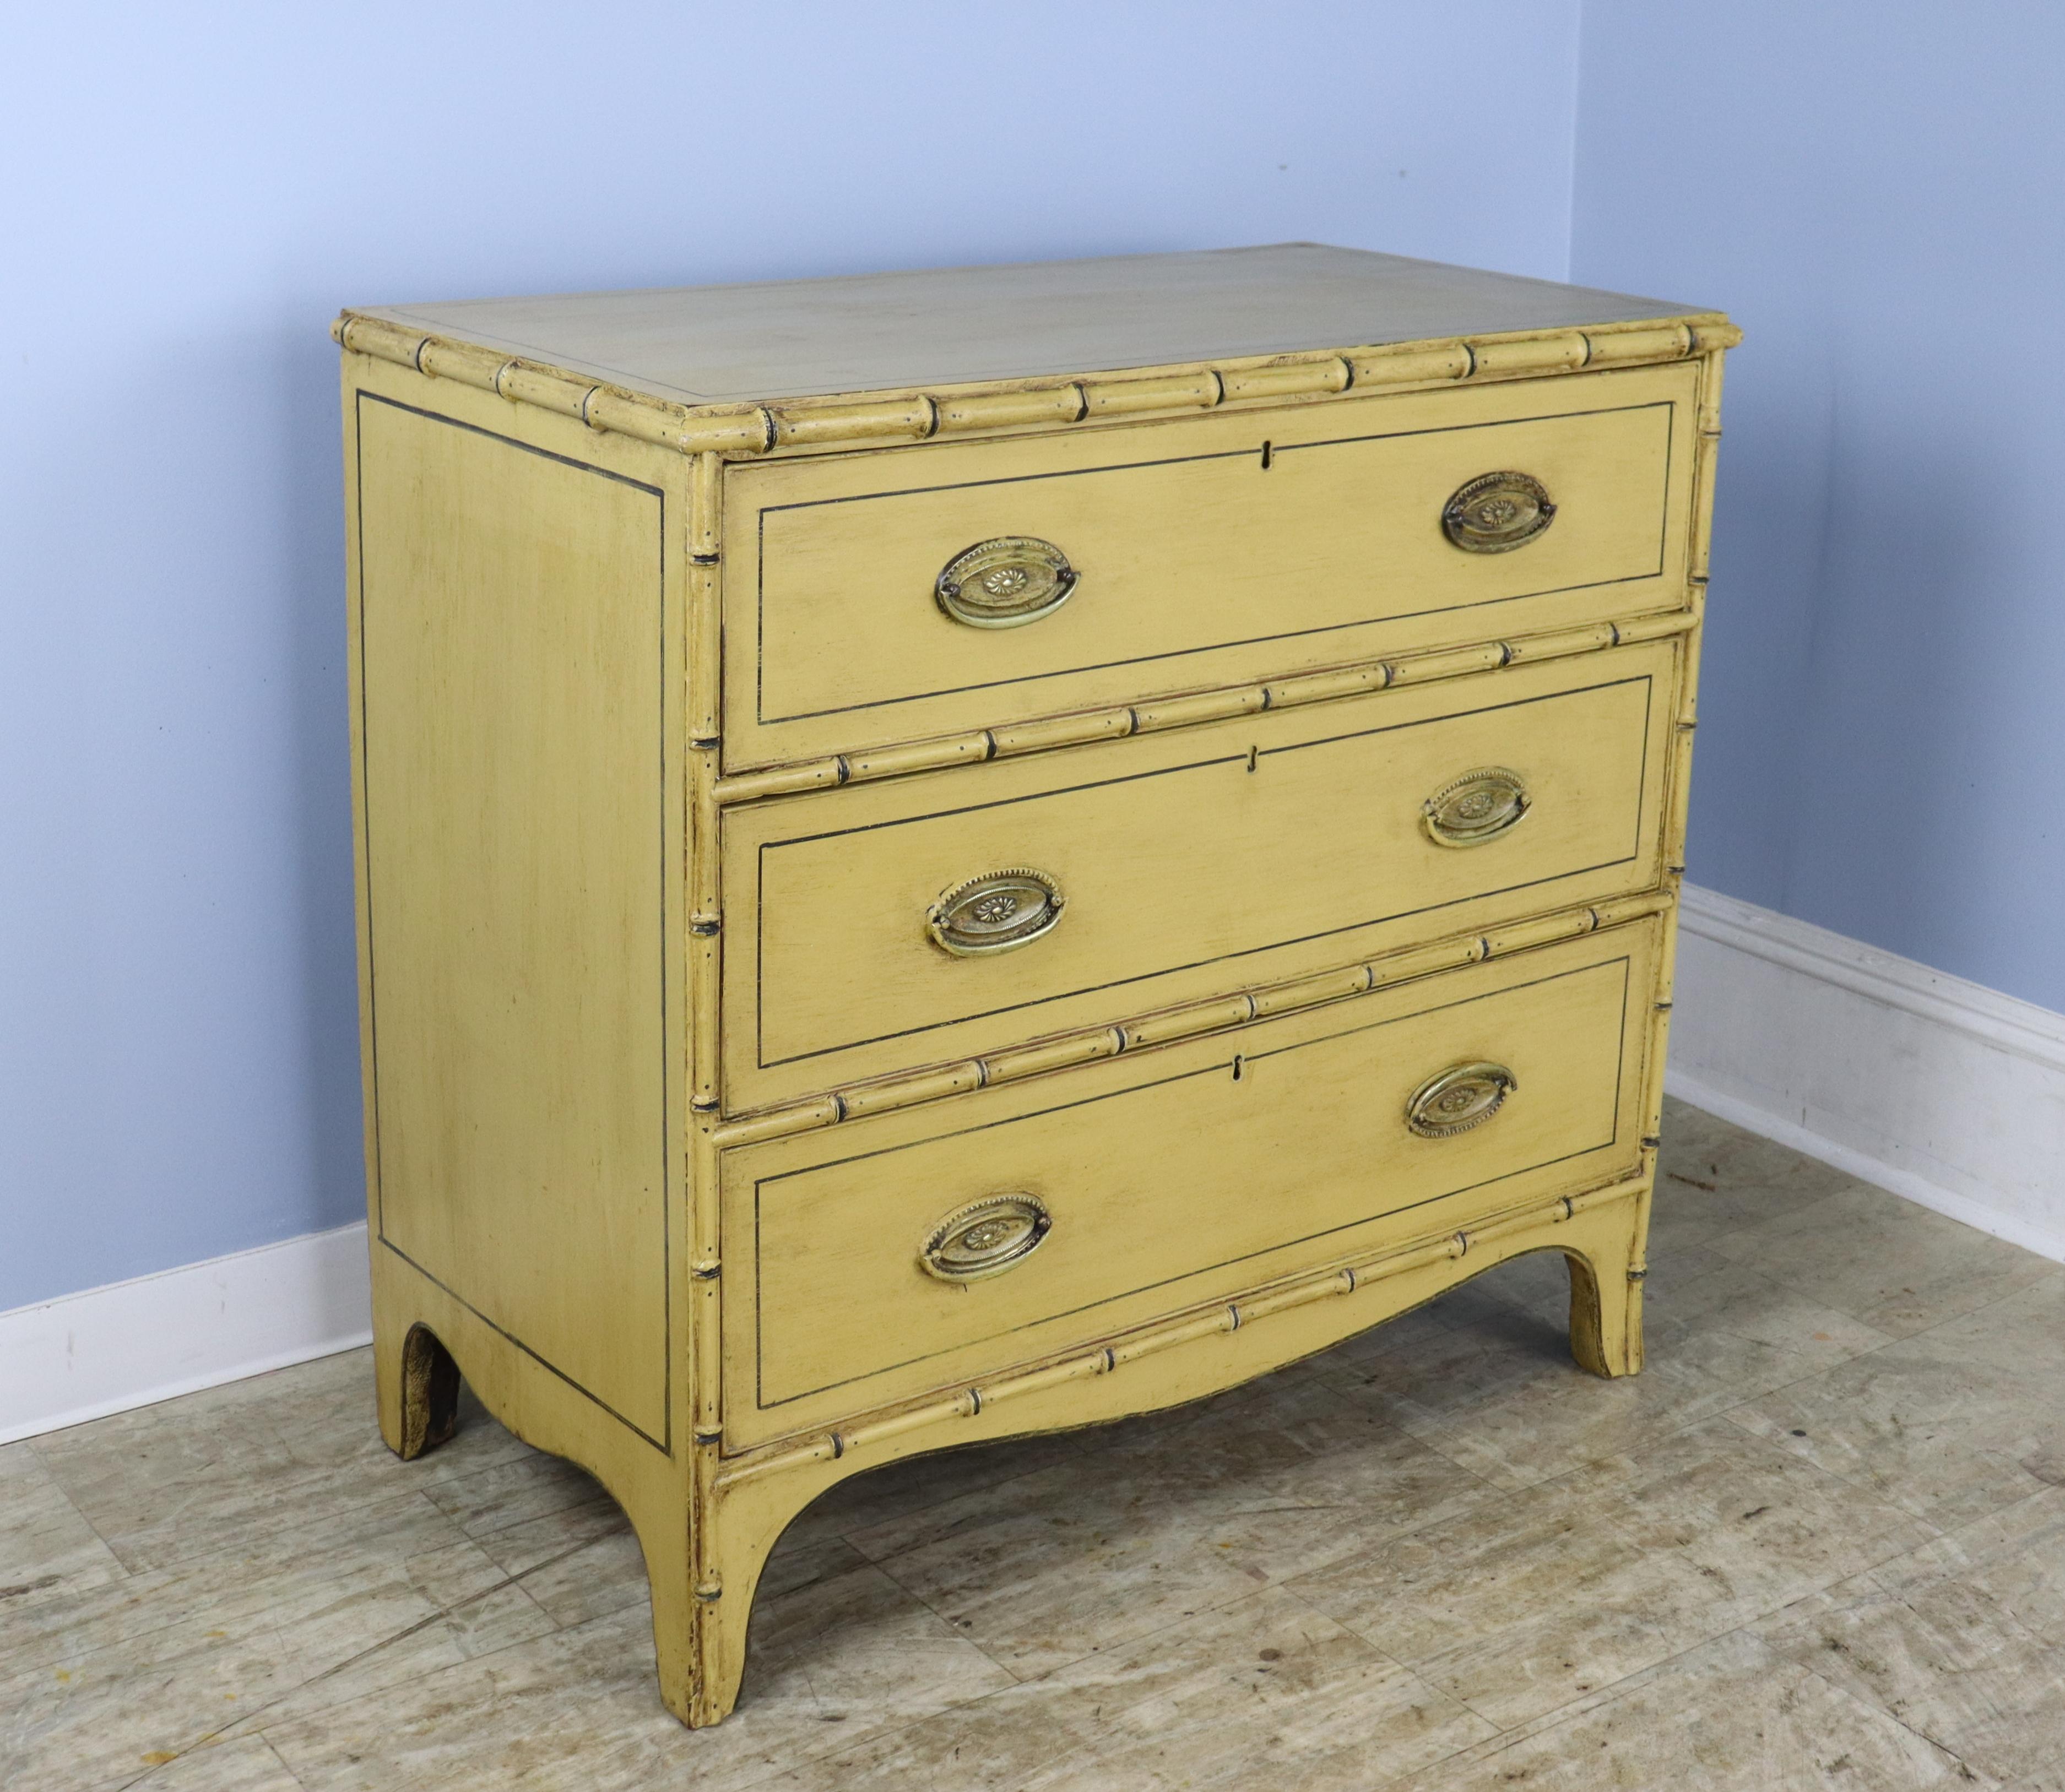 A charming Regency chest of drawers with bamboo detail, newly painted in an antique yellow/butterscotch, finished with beeswax to create a faux distressed effect. Perfectly suited to a beach cottage, child's room or guest room. Roomy drawers open